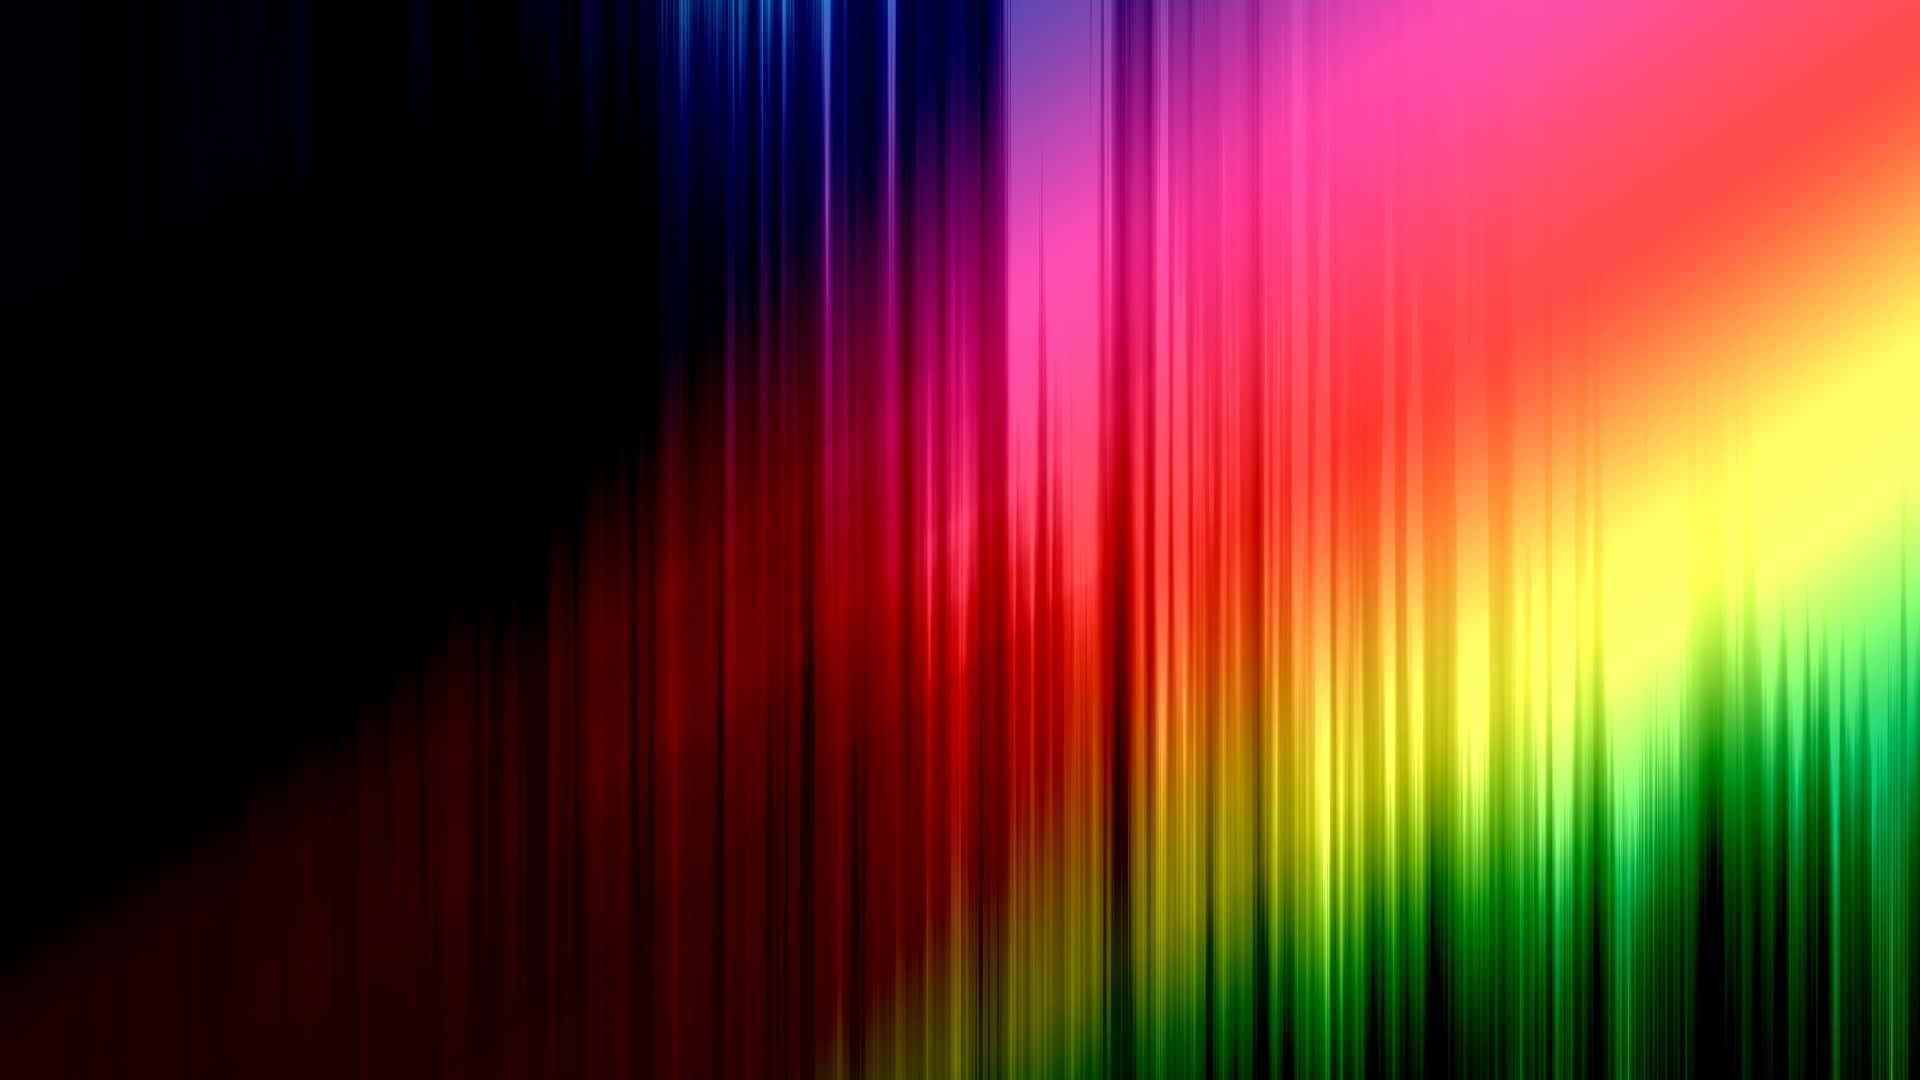 With the Spectrum logo on a many-colored background, enter the world of endless possibilities